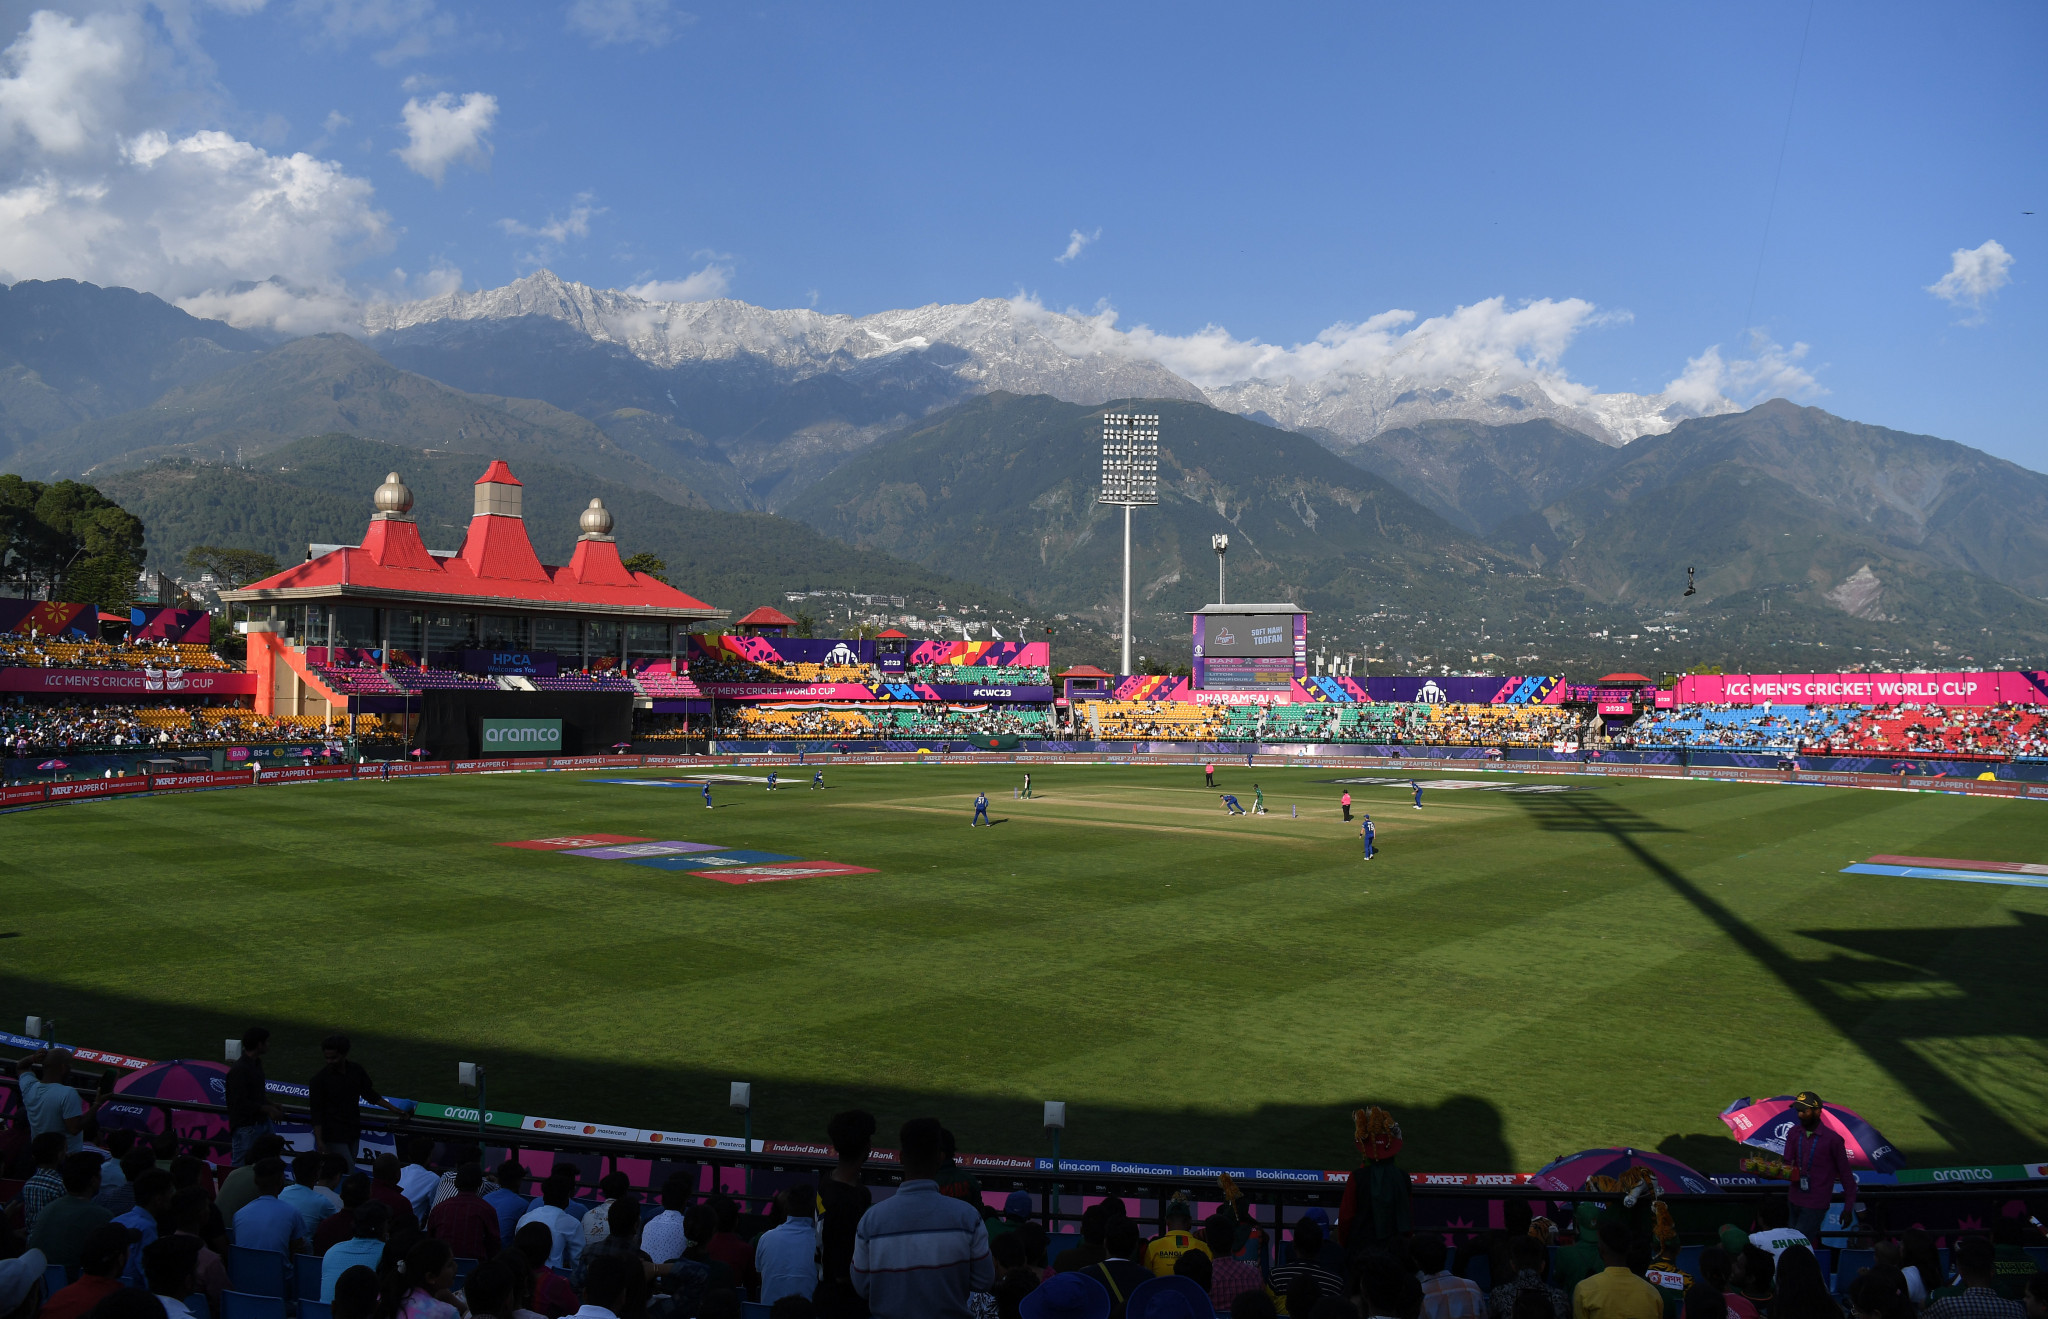 England defeated Bangladesh by 137 runs at the picturesque ground in Dharamsala, located in the foothills of the Himalayas ©Getty Images